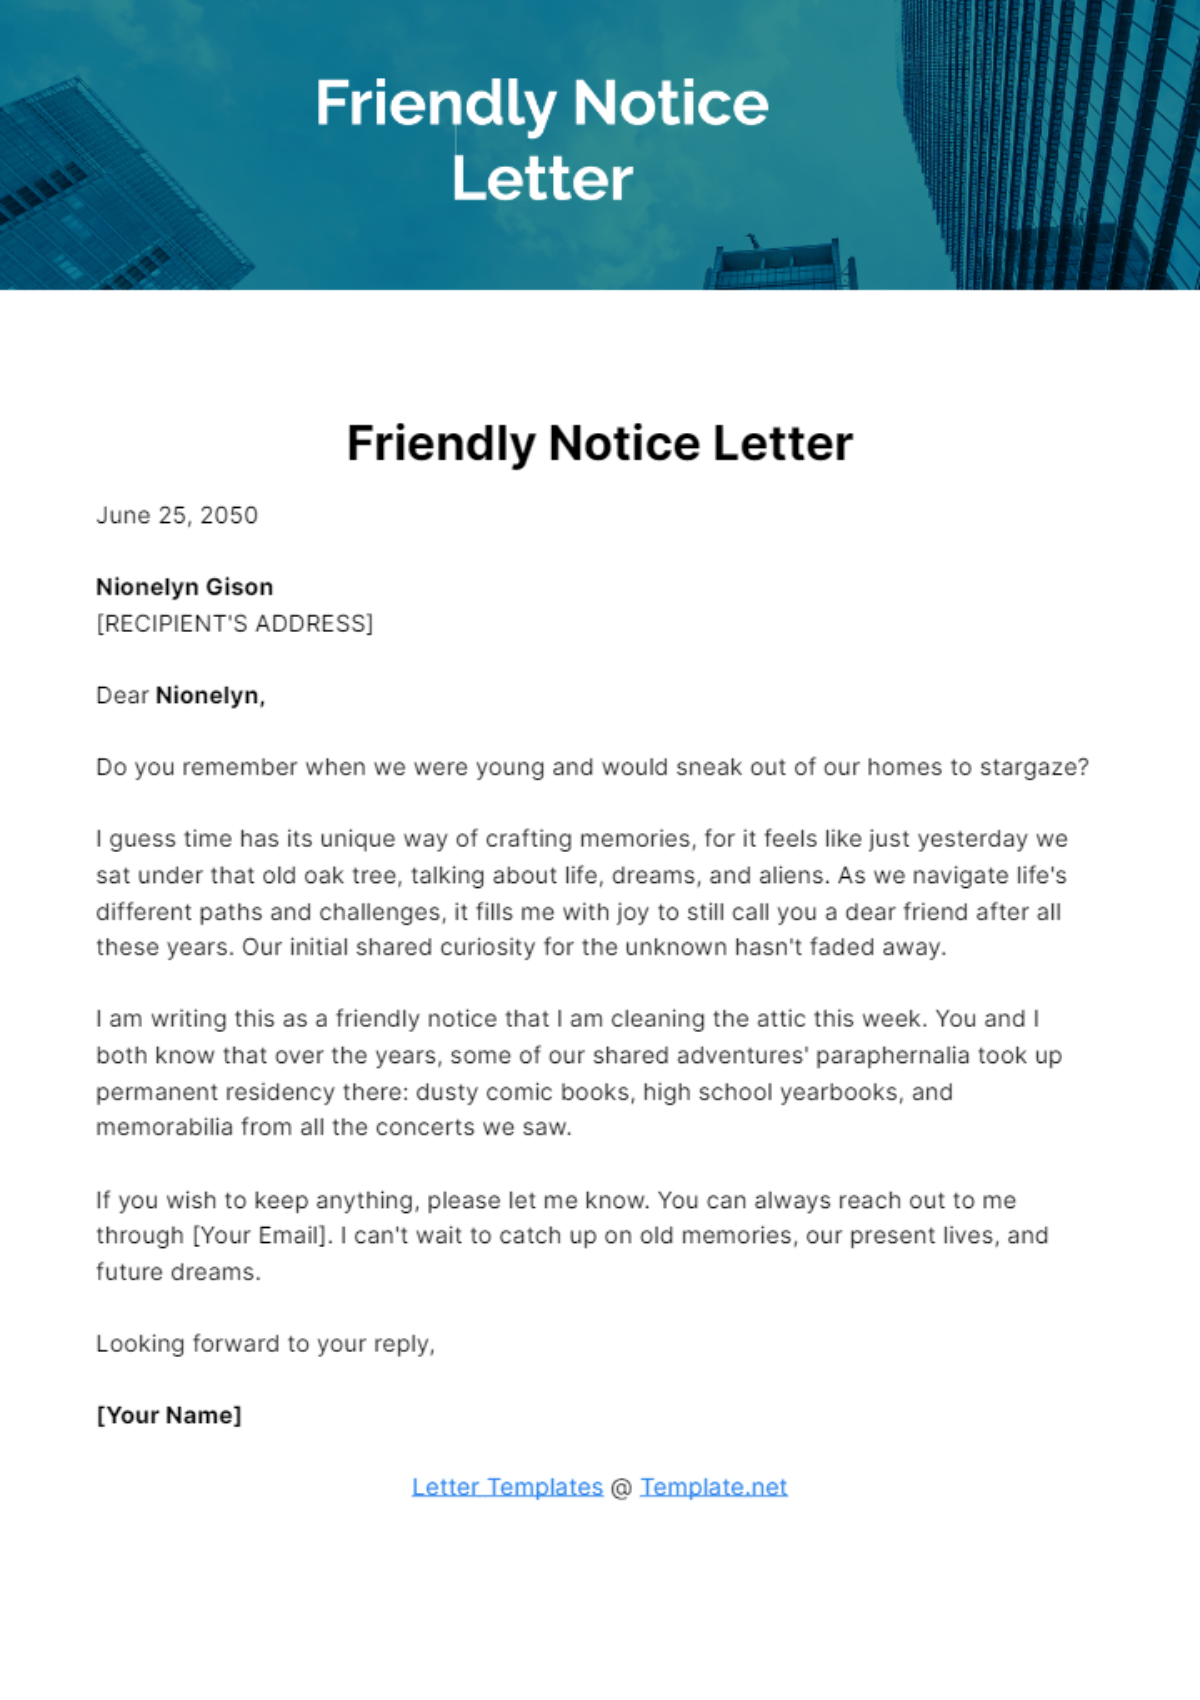 Free Friendly Notice Letter Template